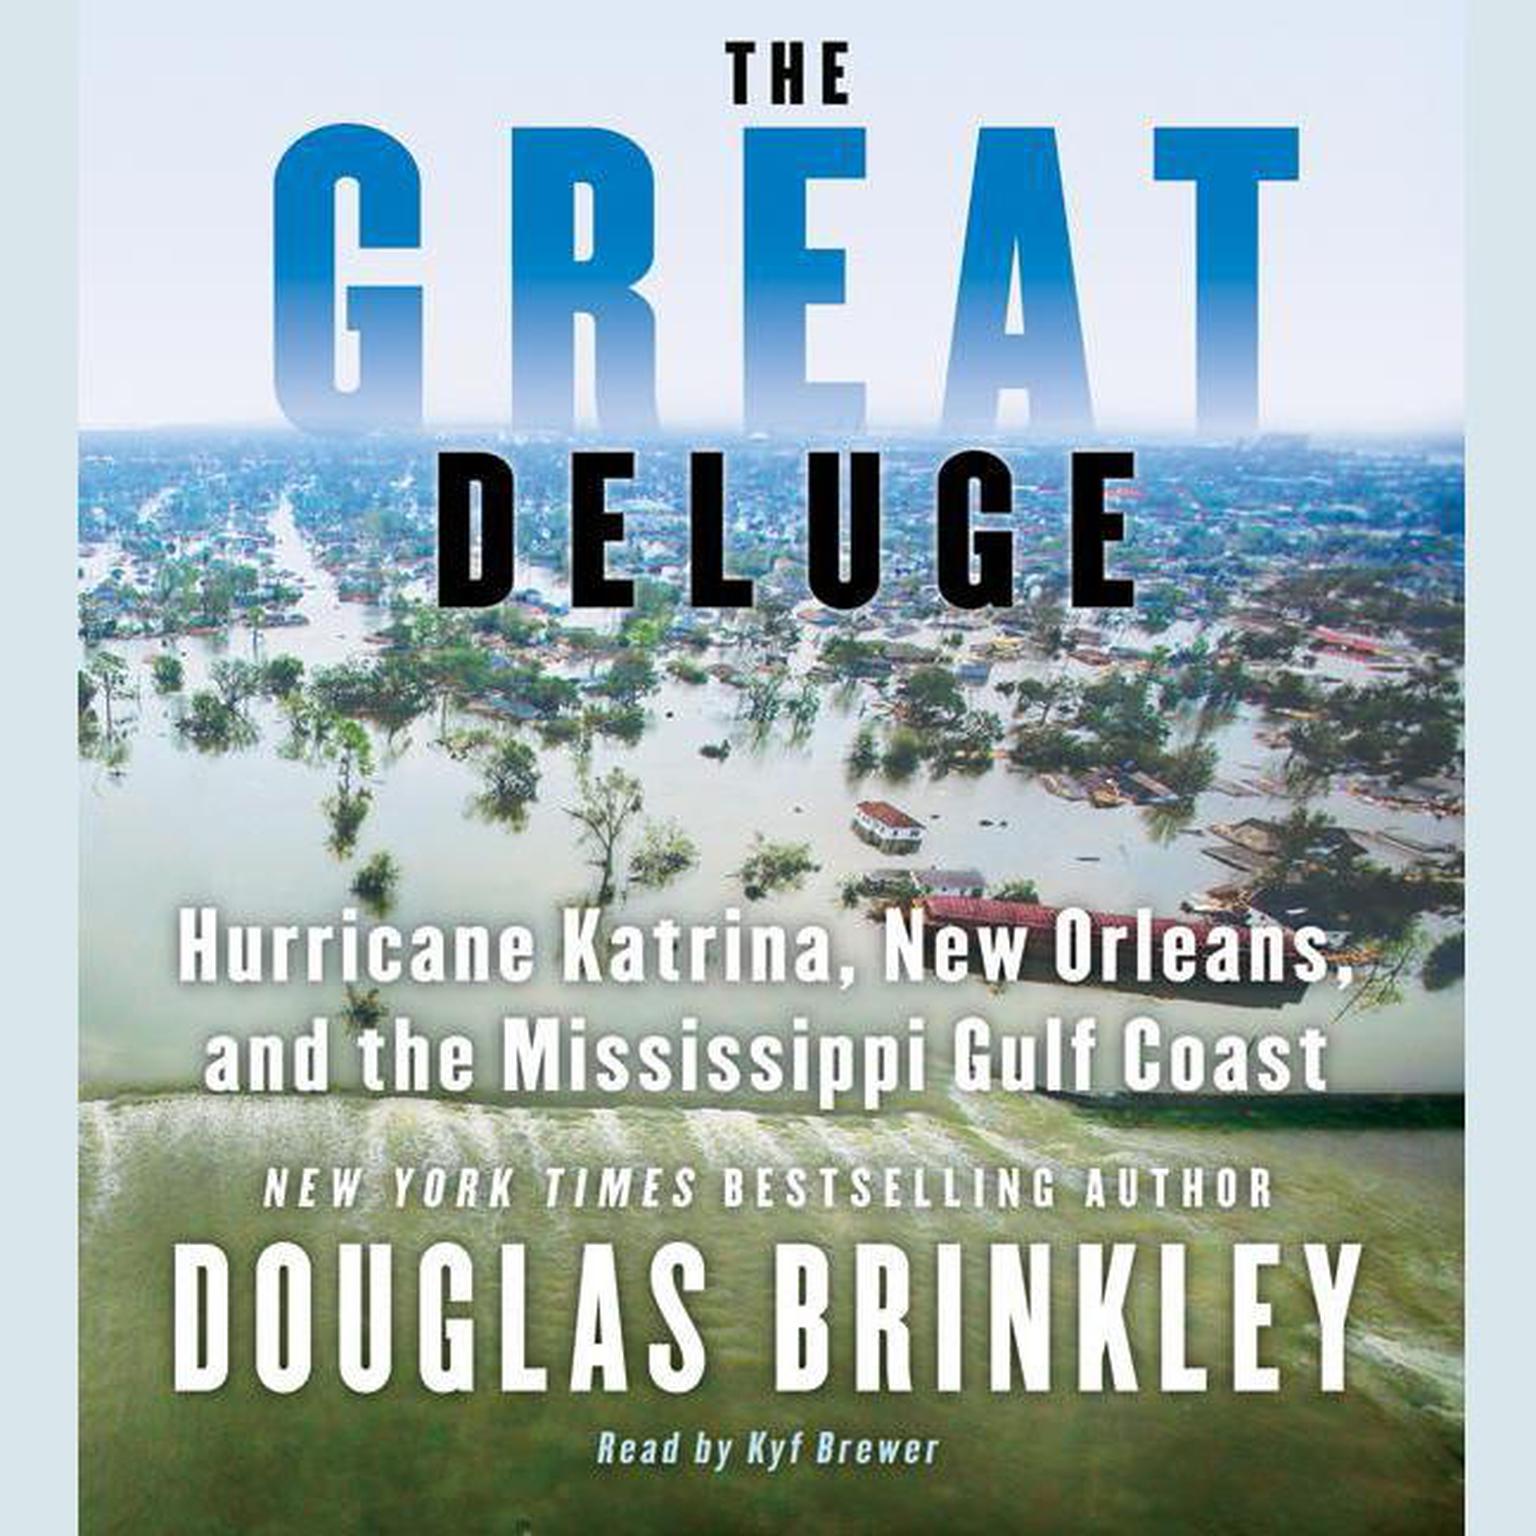 The Great Deluge (Abridged): Hurricane Katrina, New Orleans, and the Mississippi Gulf Coast Audiobook, by Douglas Brinkley